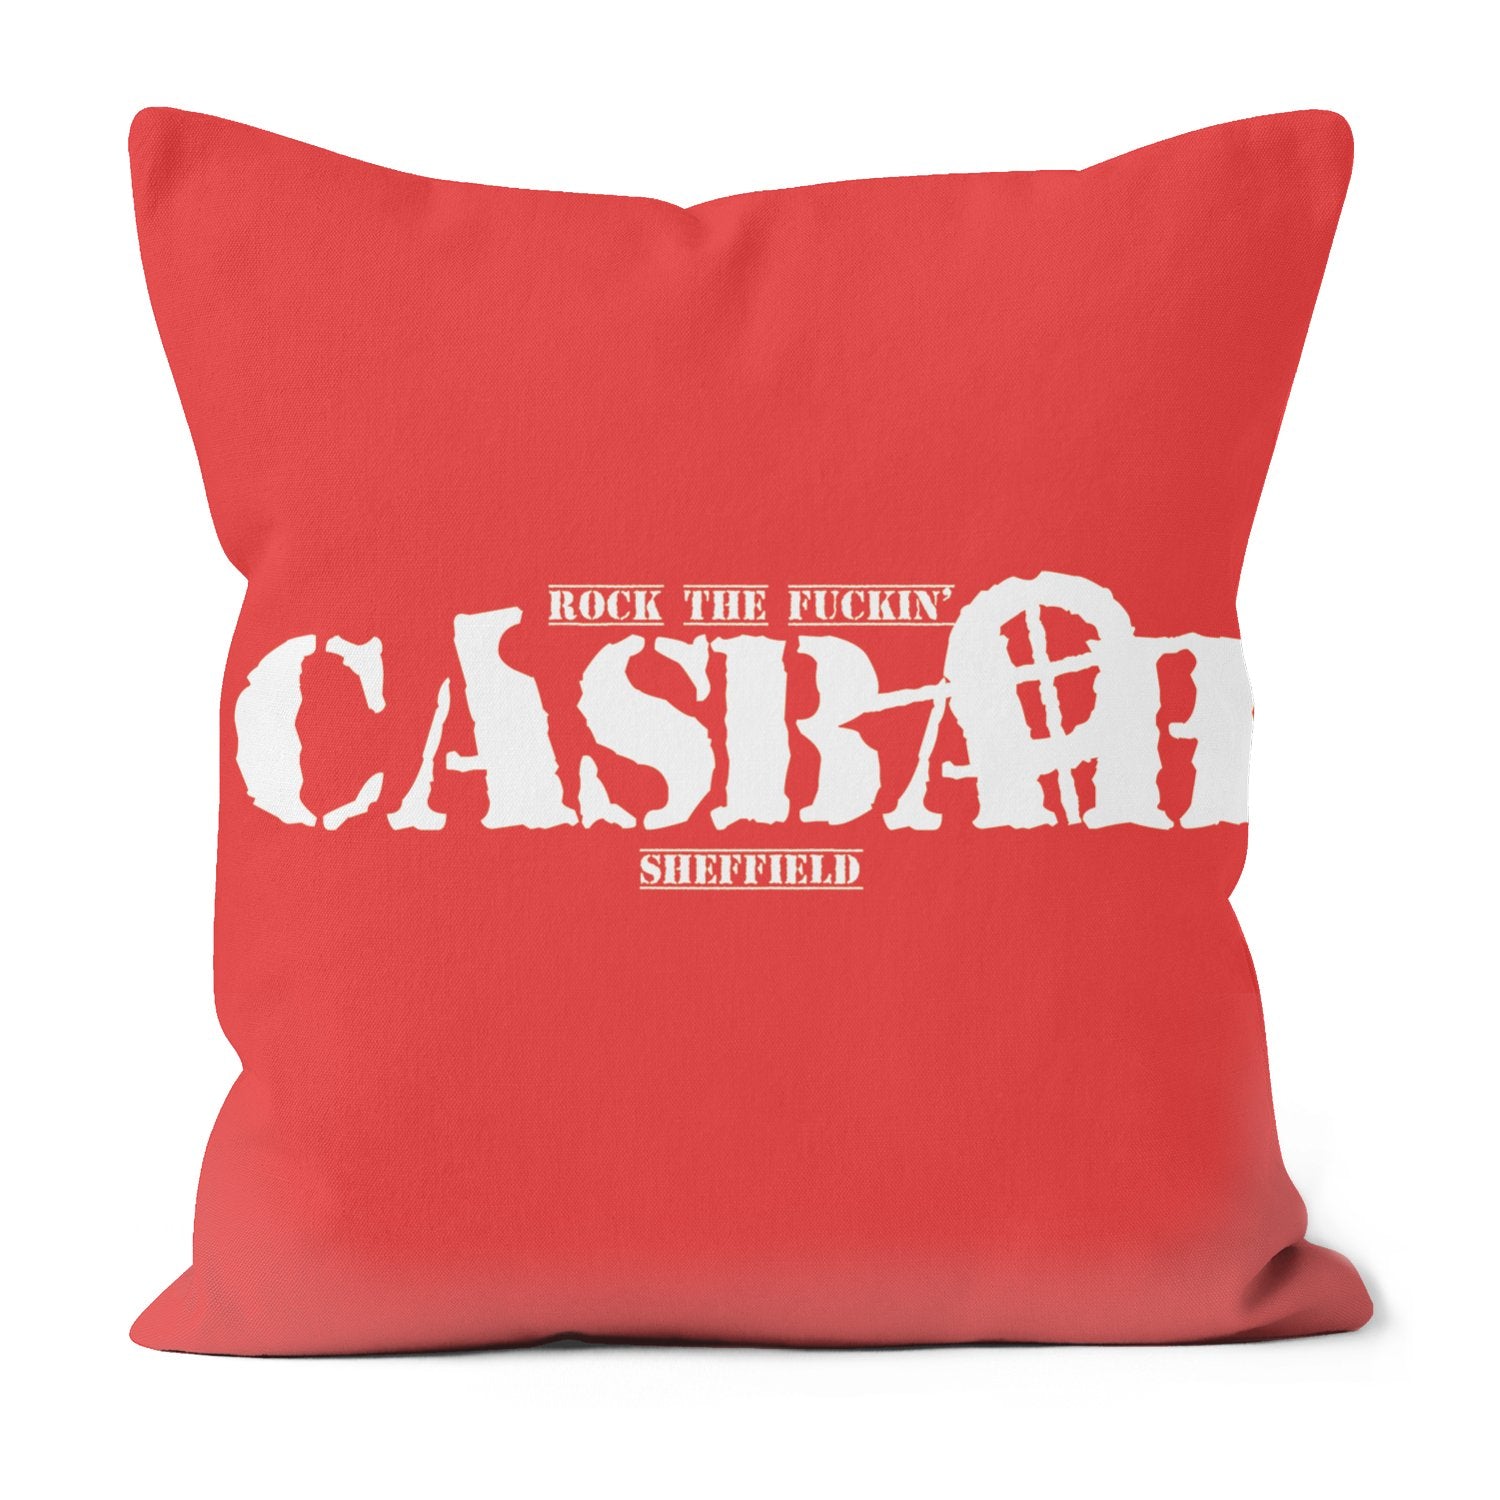 Casbah - handmade cushion - Dirty Stop Outs